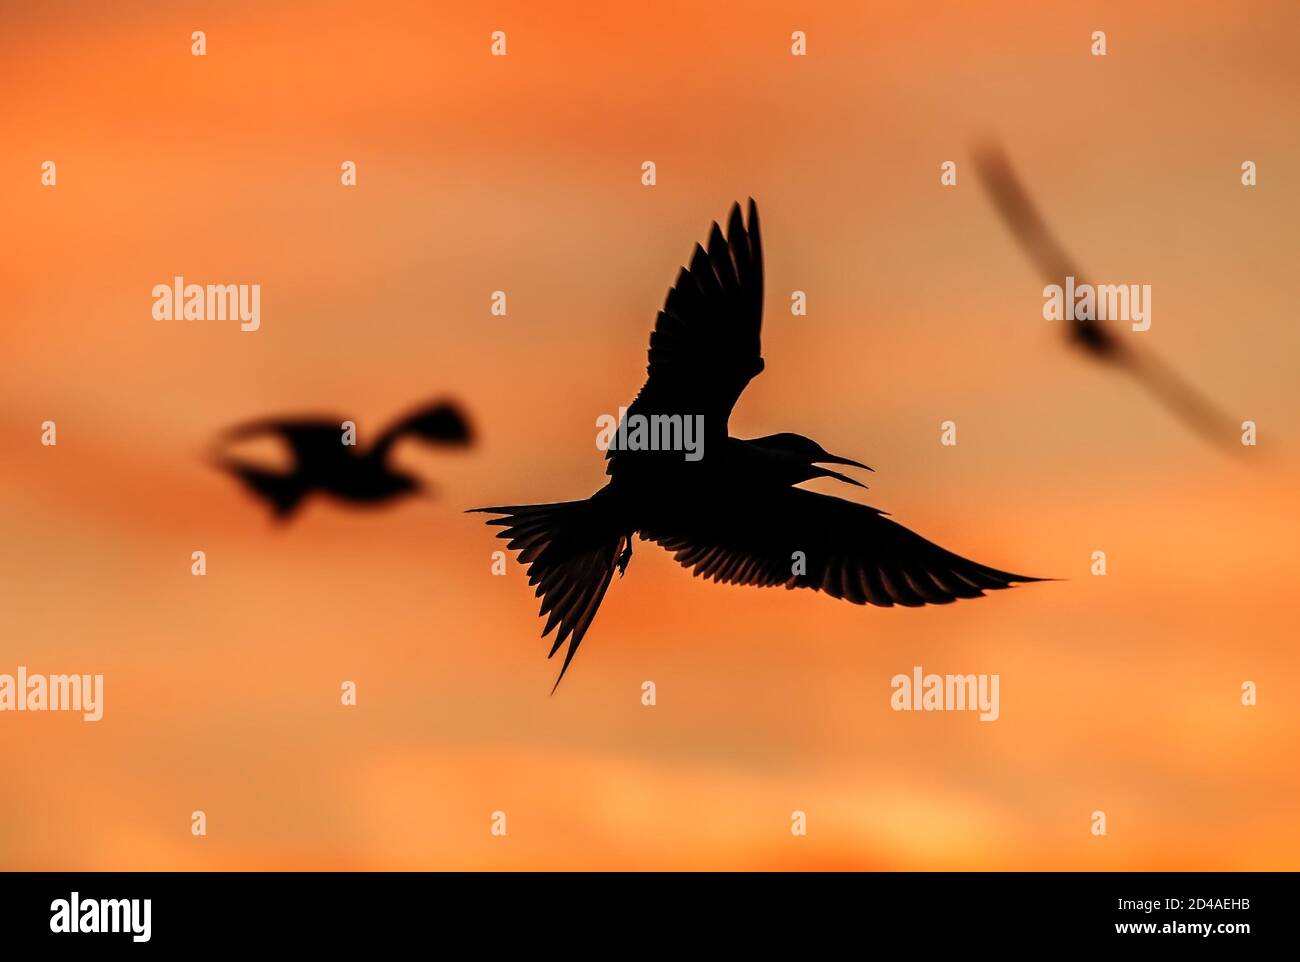 Silhouette of flying common tern. Flying common tern on the sunset sky background. Scientific name: Sterna hirundo. Stock Photo